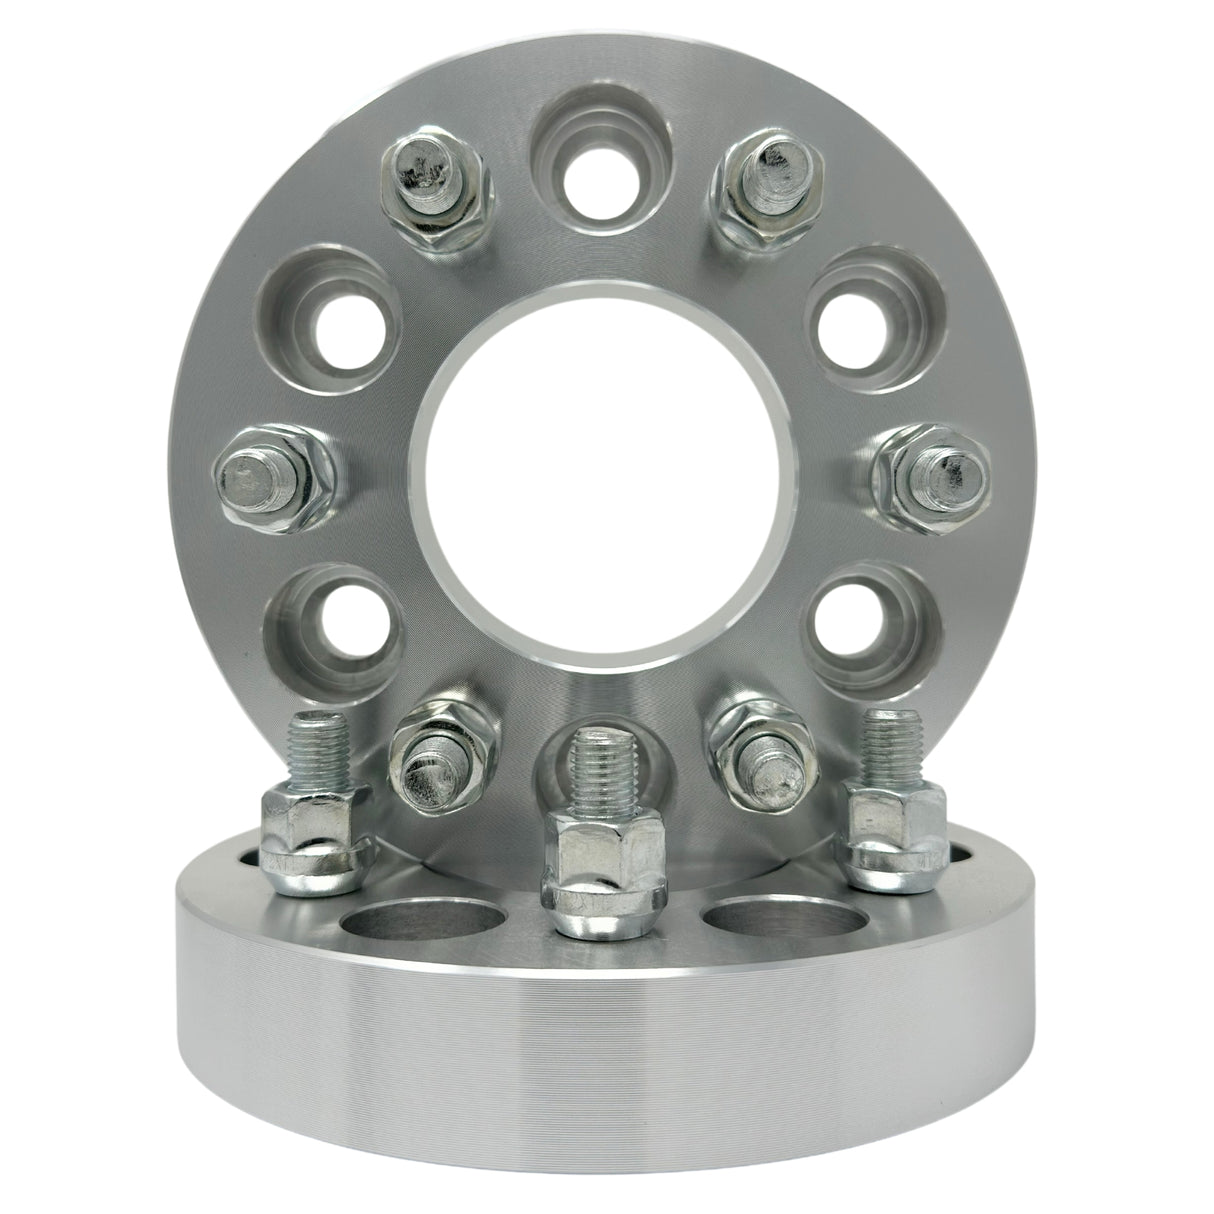 6x4.5 (6x114.3) Wheel Spacers 1.5"Inch (38mm) 12x1.25 Studs & Lug Nuts 66.1mm Center Bore